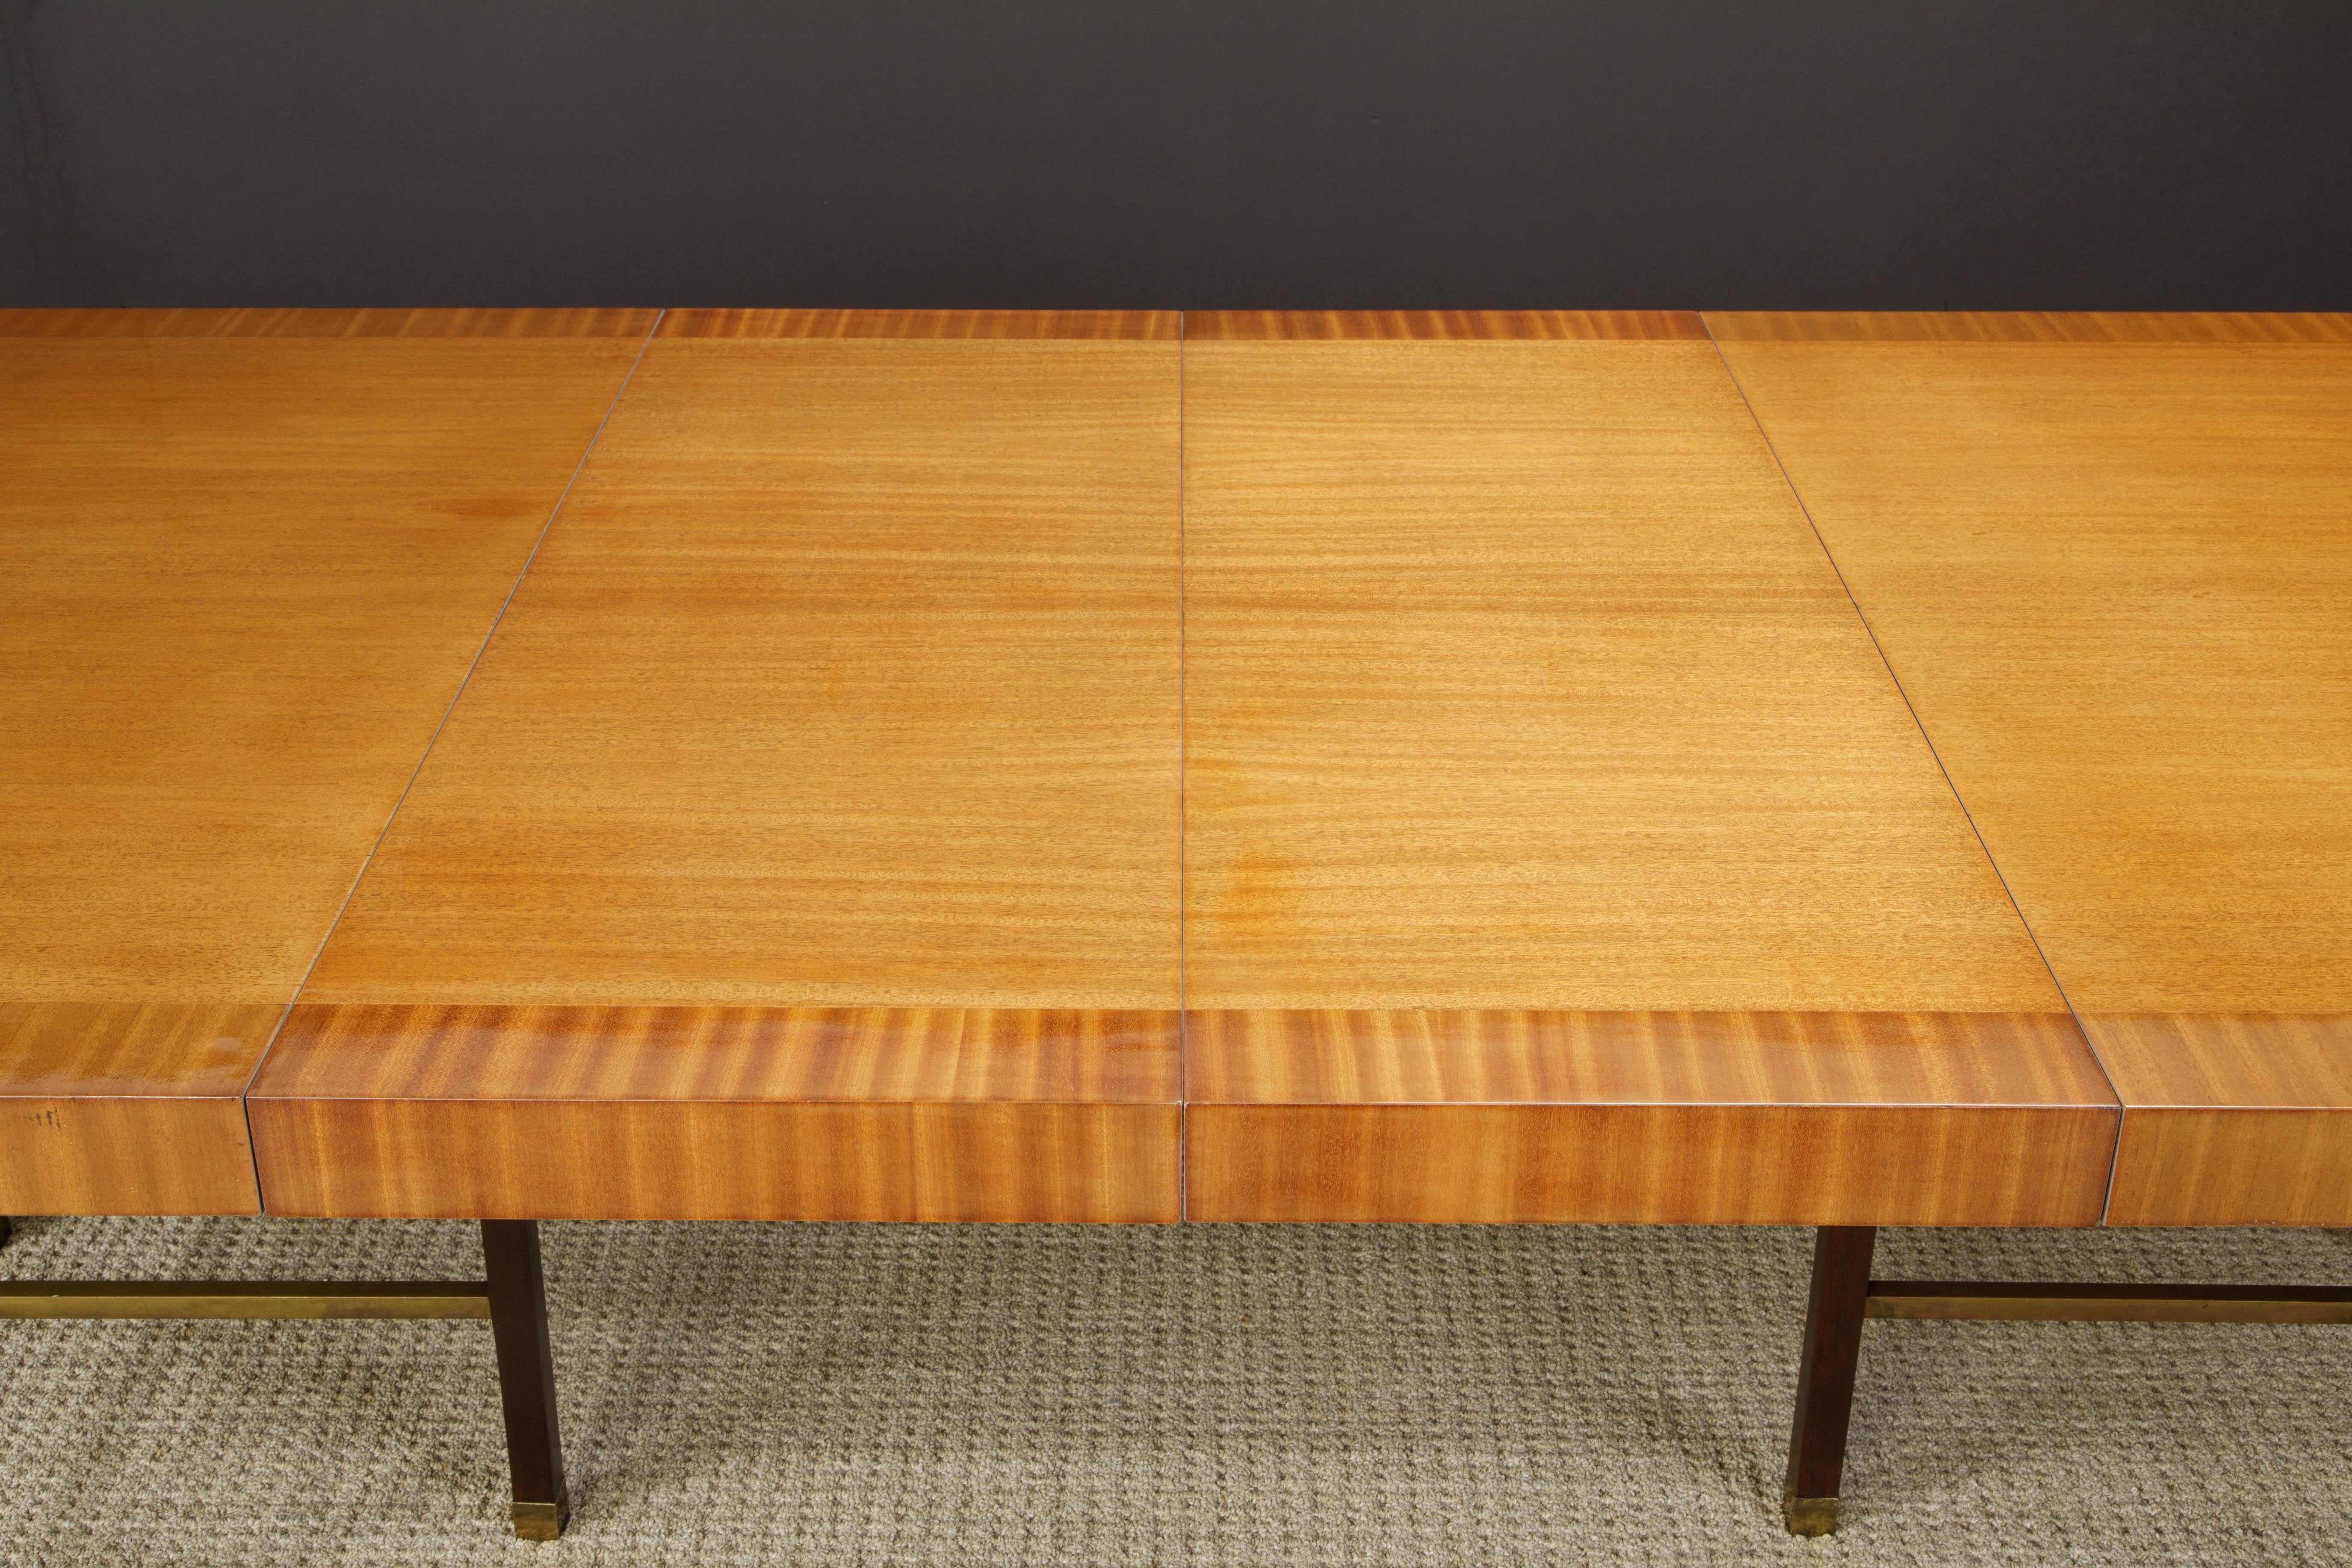 Harvey Probber 12-Person Extendable Dining Table in Mahogany and Brass, 1950s For Sale 6